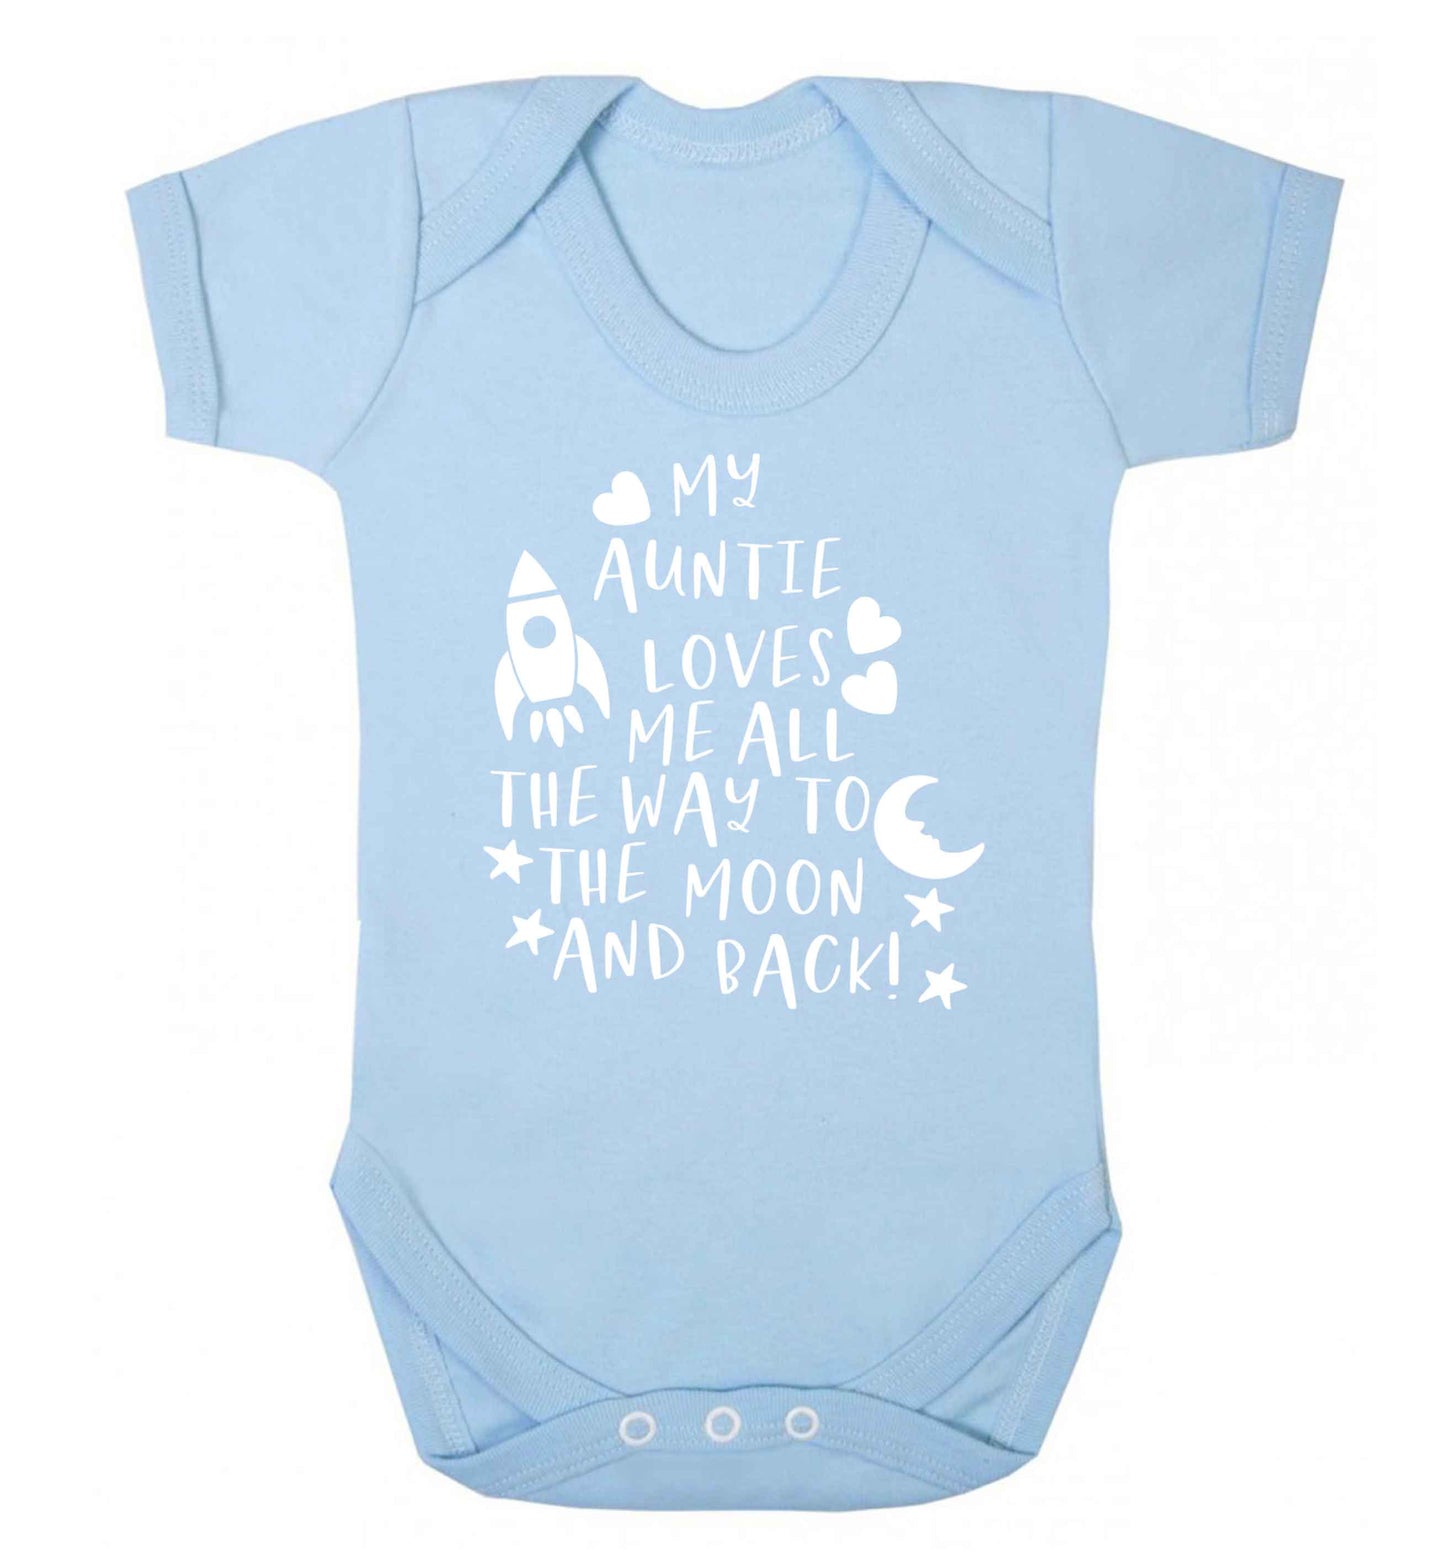 My auntie loves me all the way to the moon and back Baby Vest pale blue 18-24 months